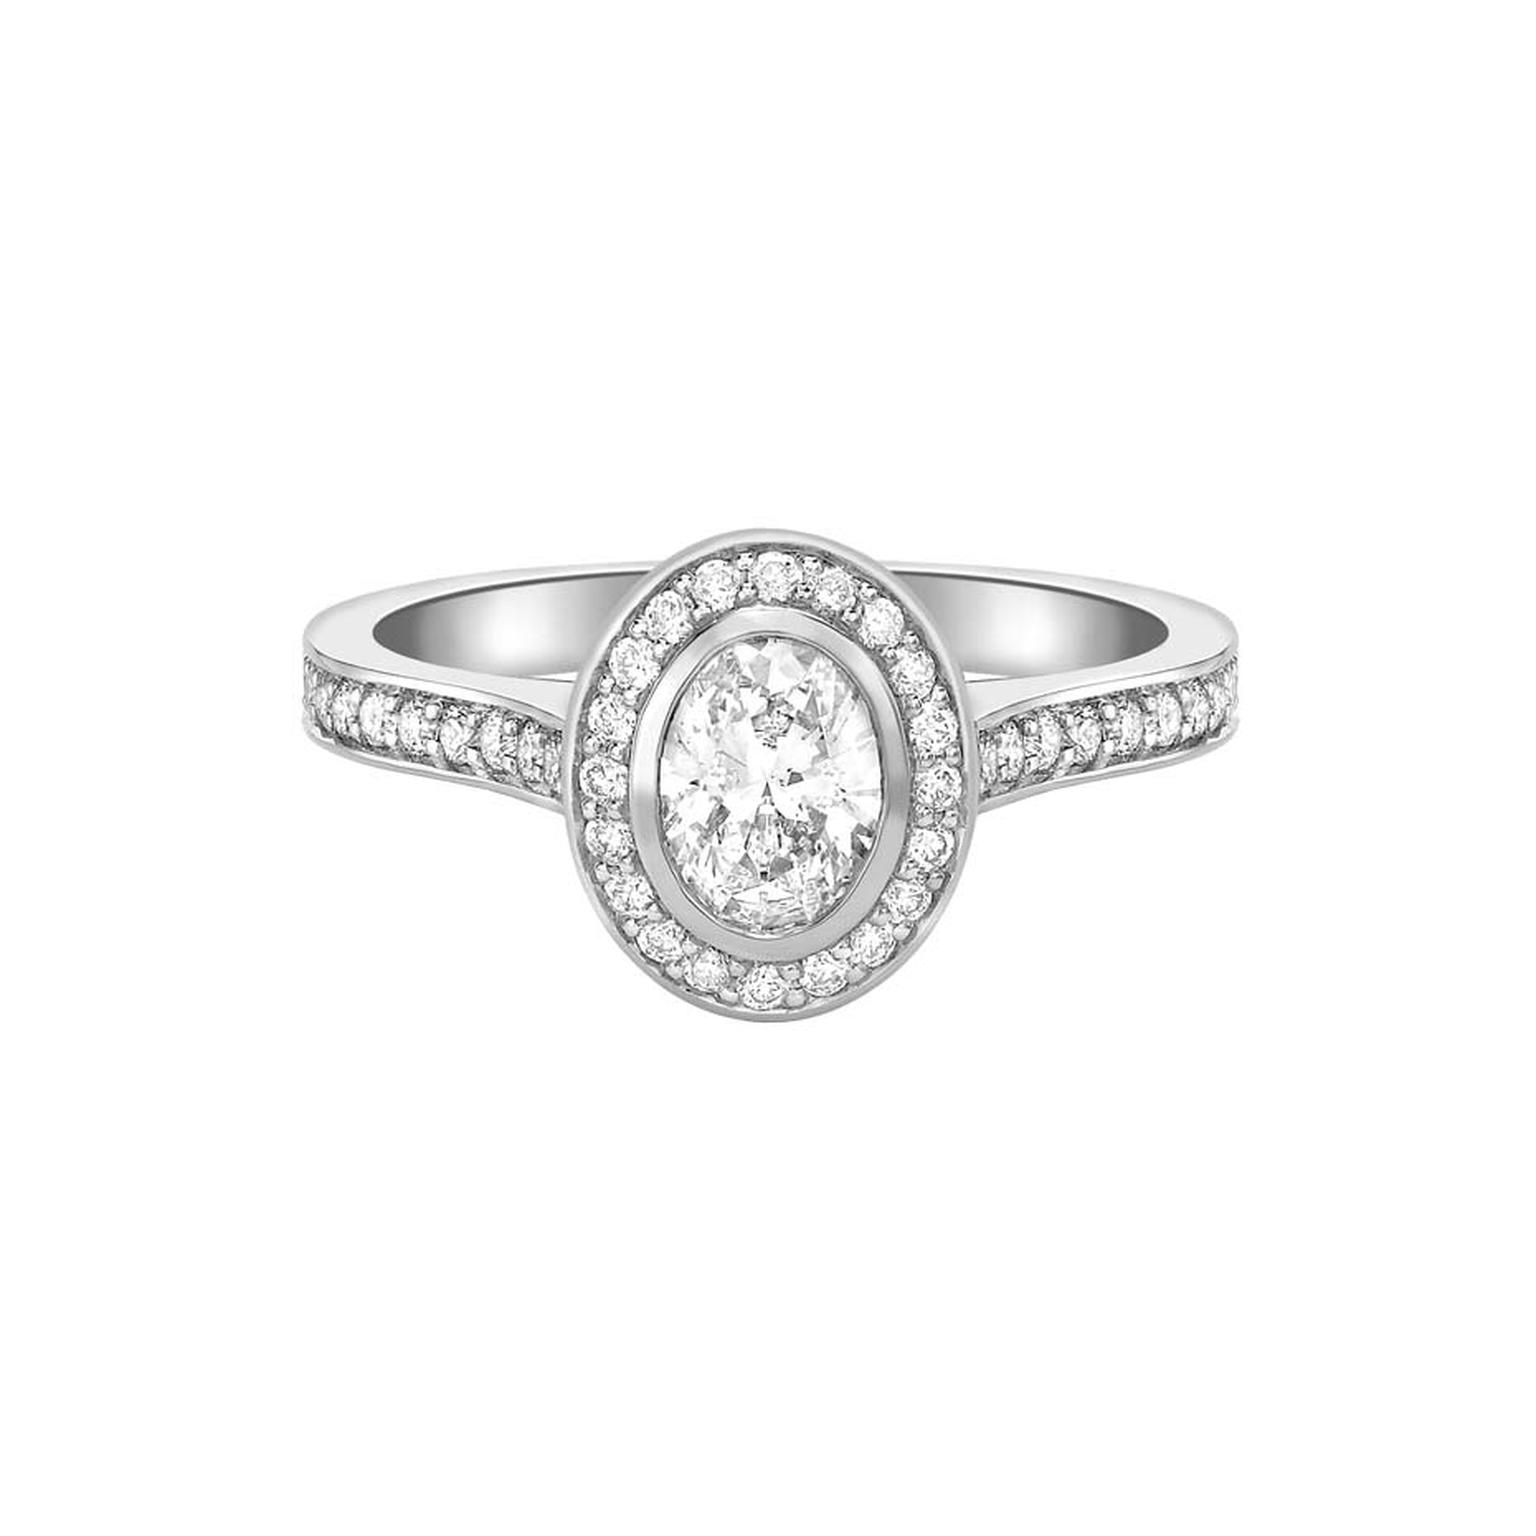 Ingle & Rhode Pavane diamond engagement ring set with a 0.5ct oval-cut diamond in platinum (£3,995).